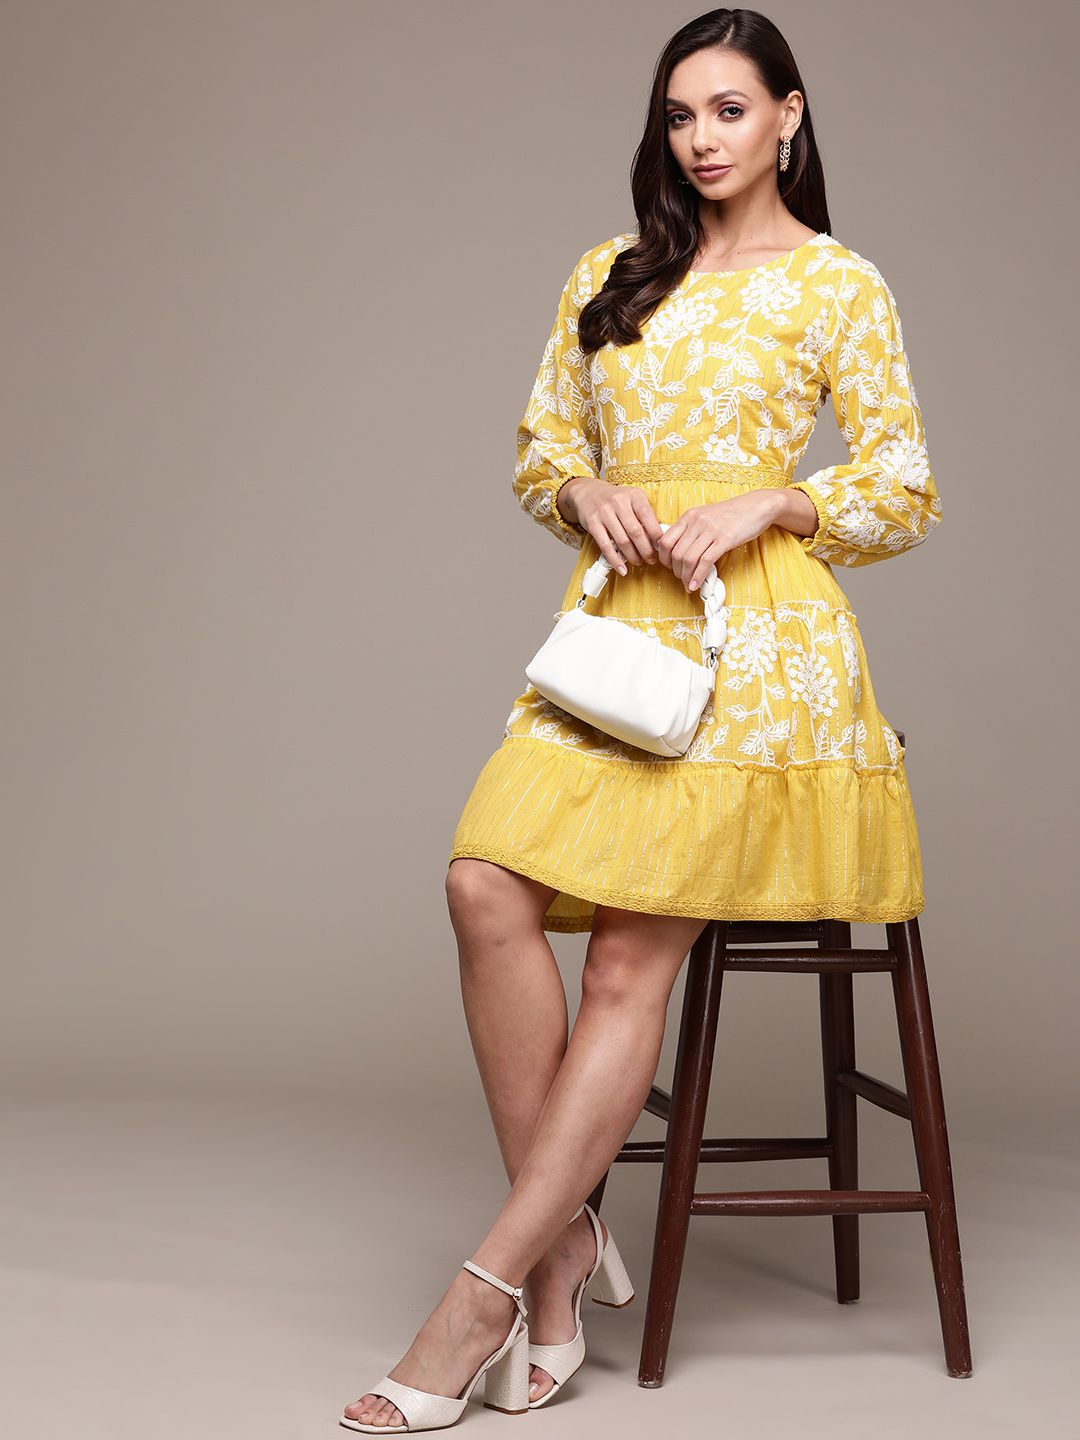 Ishin Mustard Yellow & White Floral Embroidered Cotton A-Line Dress Price in India